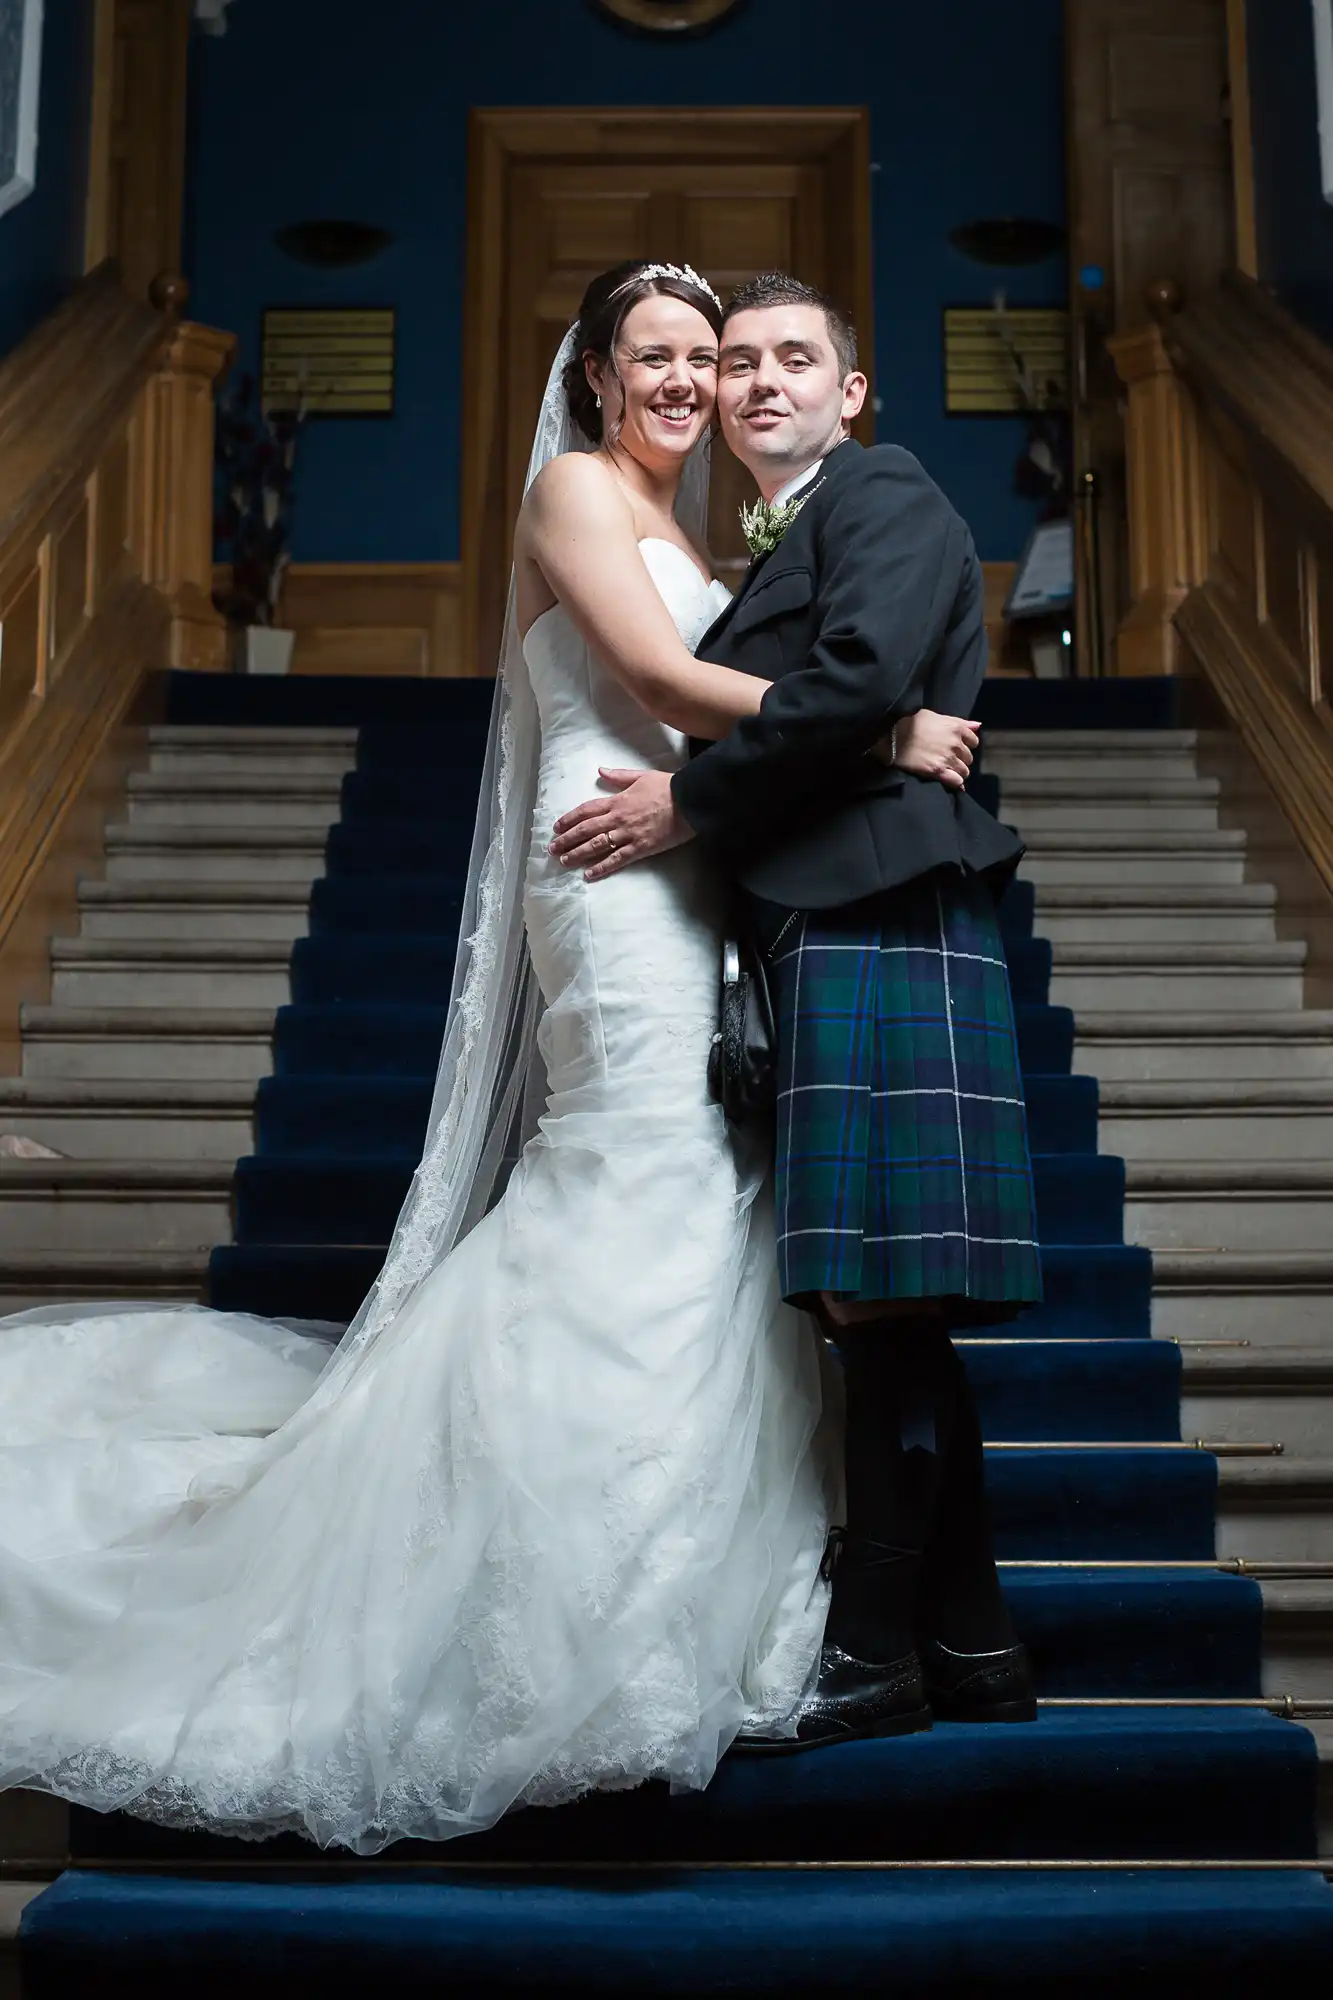 A bride in a white gown and a groom in a kilt embrace on a staircase, smiling joyfully at their wedding.